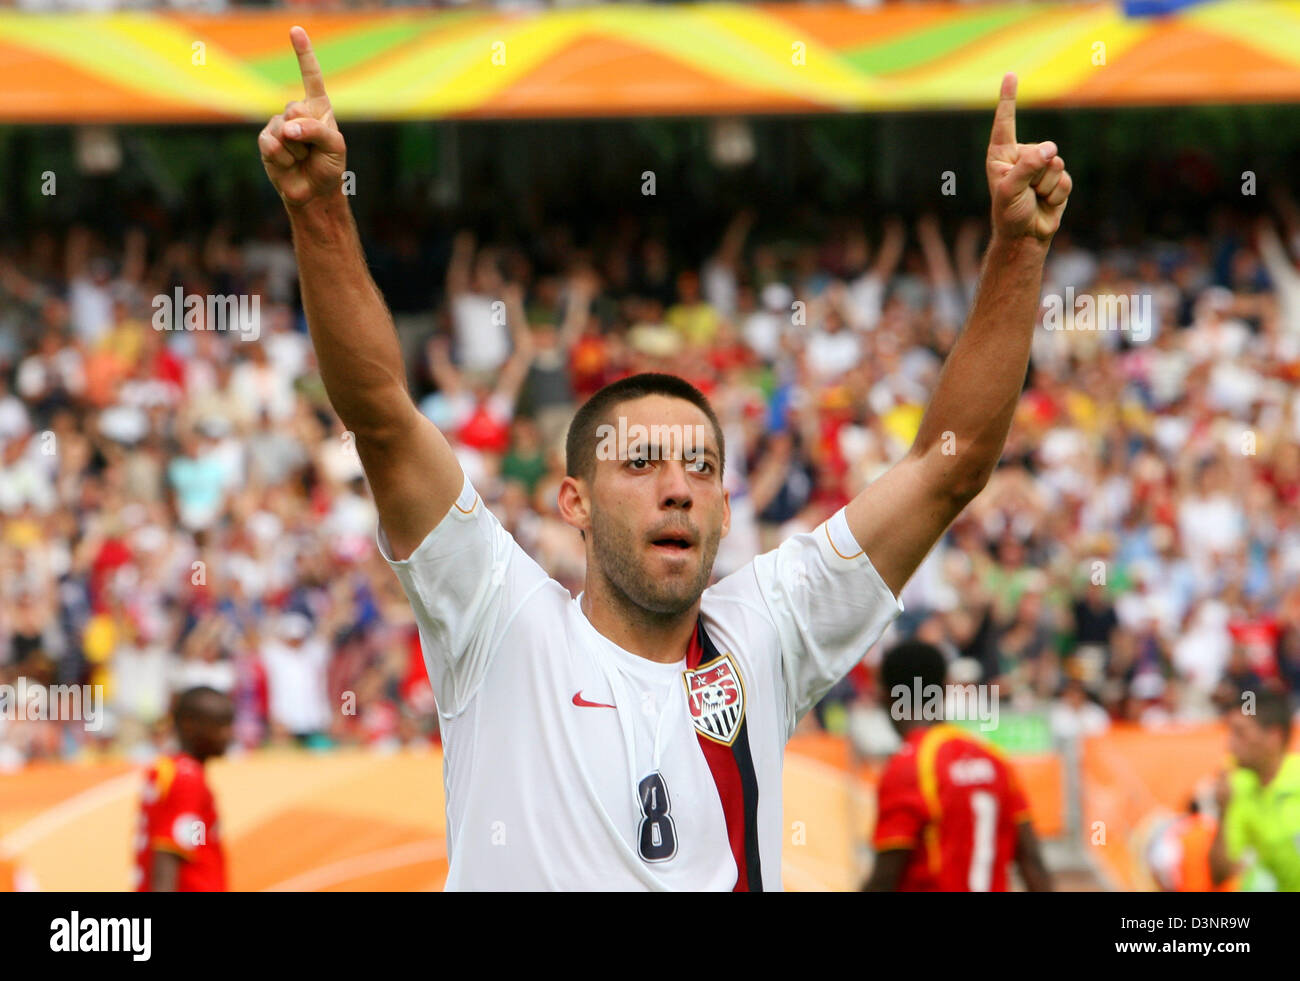 Clint Dempsey of USA celebrates after scoring a goal (1:1) during the group E preliminary round match of the 2006 FIFA World Cup between Ghana and USA in Nuremberg, Germany, Thursday 22 June 2006. DPA/PETER KNEFFEL +++ Mobile Services OUT +++ Please also refer to FIFA's Terms and Conditions. Stock Photo